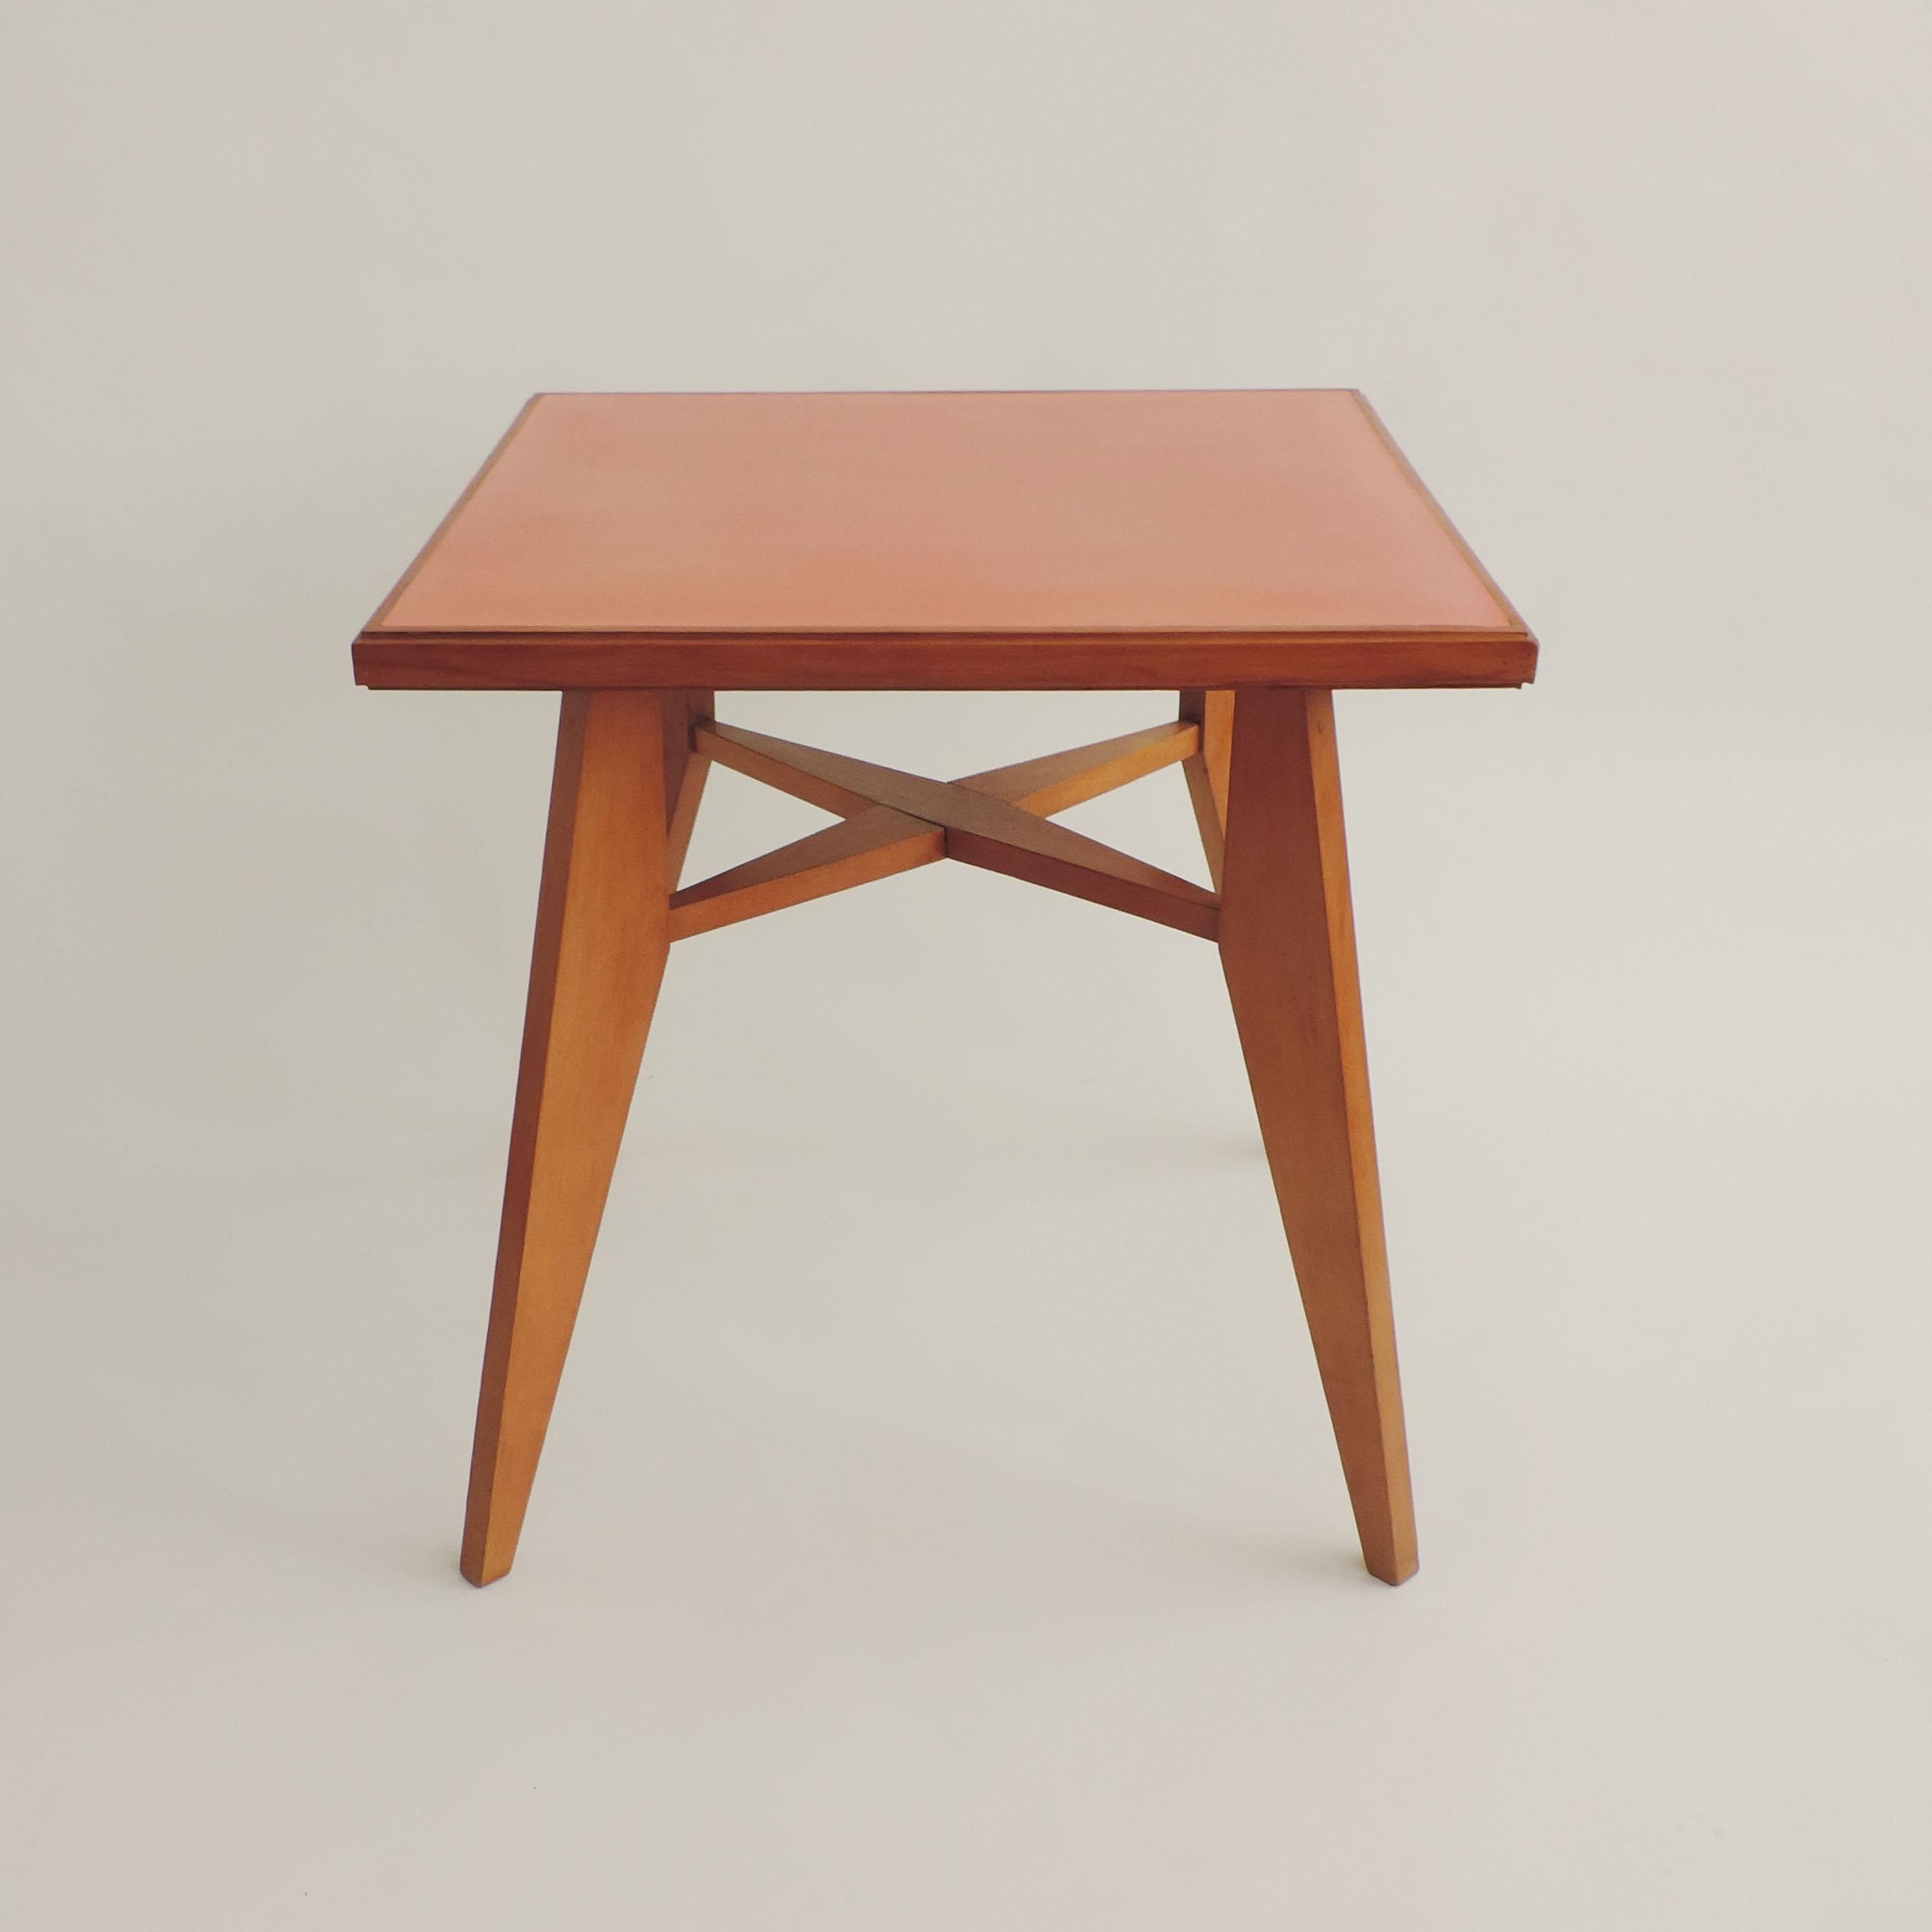 Mid-Century Modern Architectural Square Dining Table with Red Top, Italy, 1950s